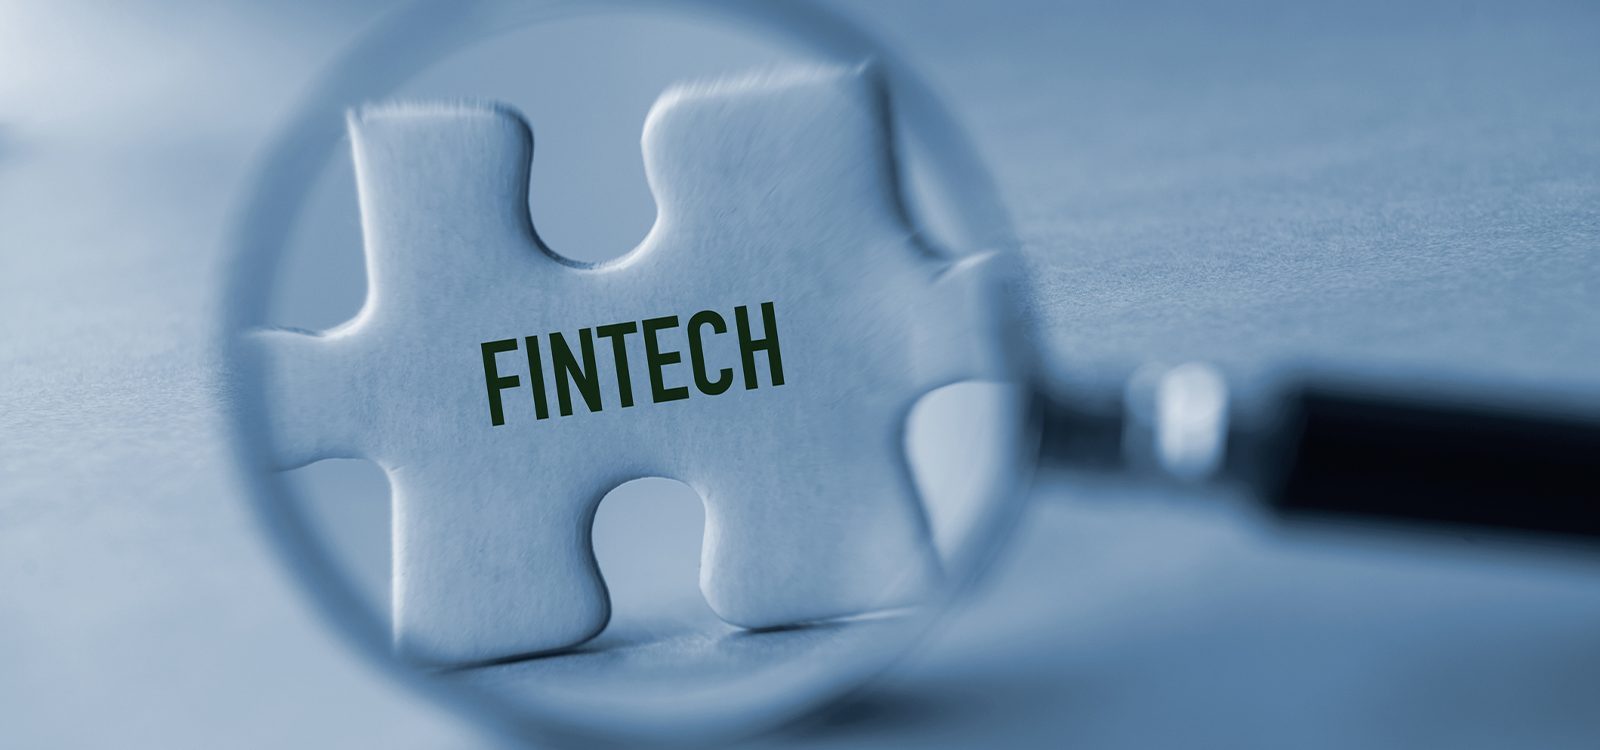 Top five tips for actuaries wanting to start a fintech